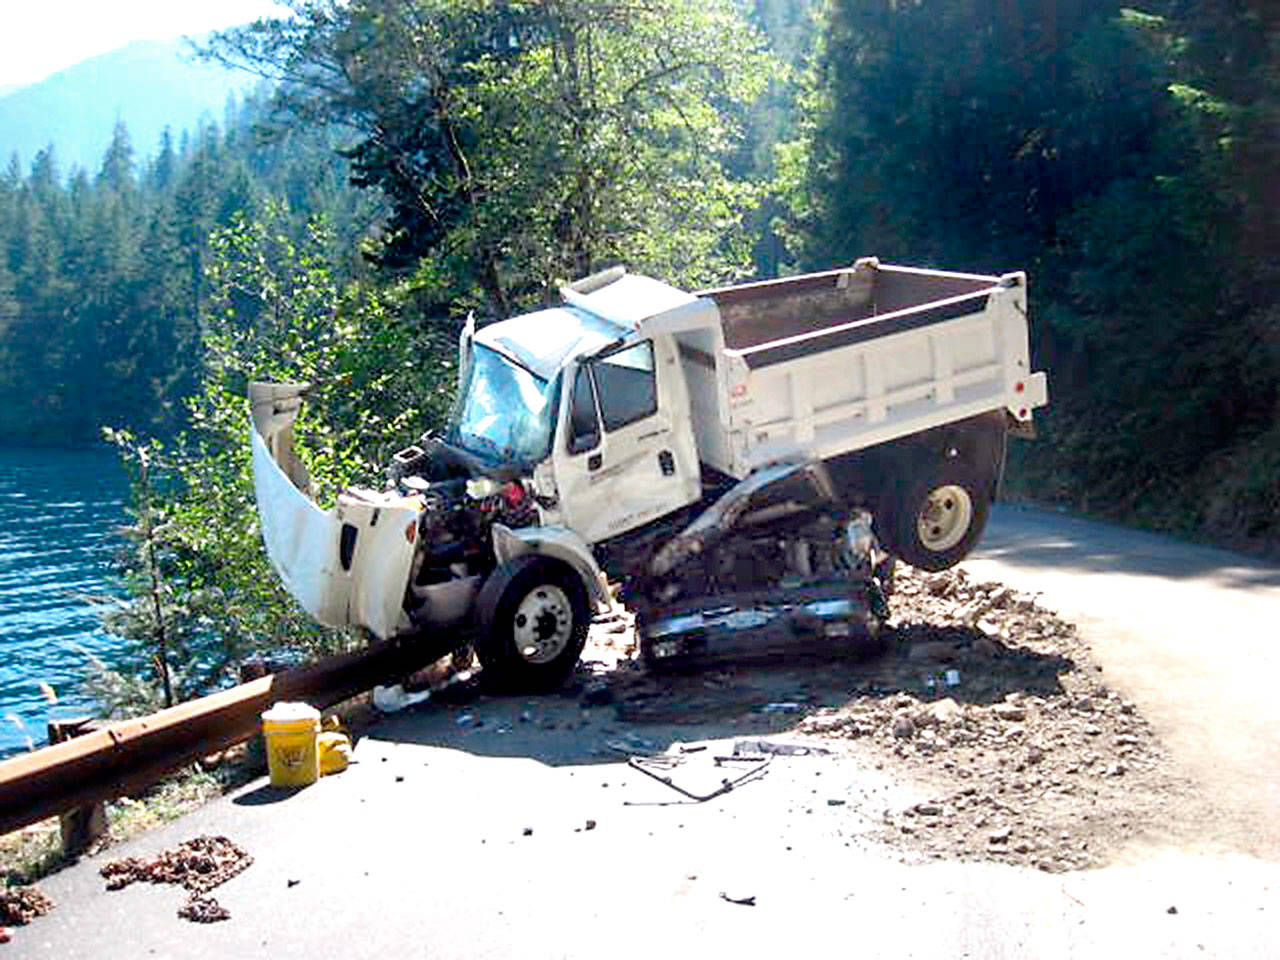 A dump truck landed on top of a pickup truck during a Wednesday wreck on U.S. Highway 101 around Lake Crescent. (Washington State Patrol)